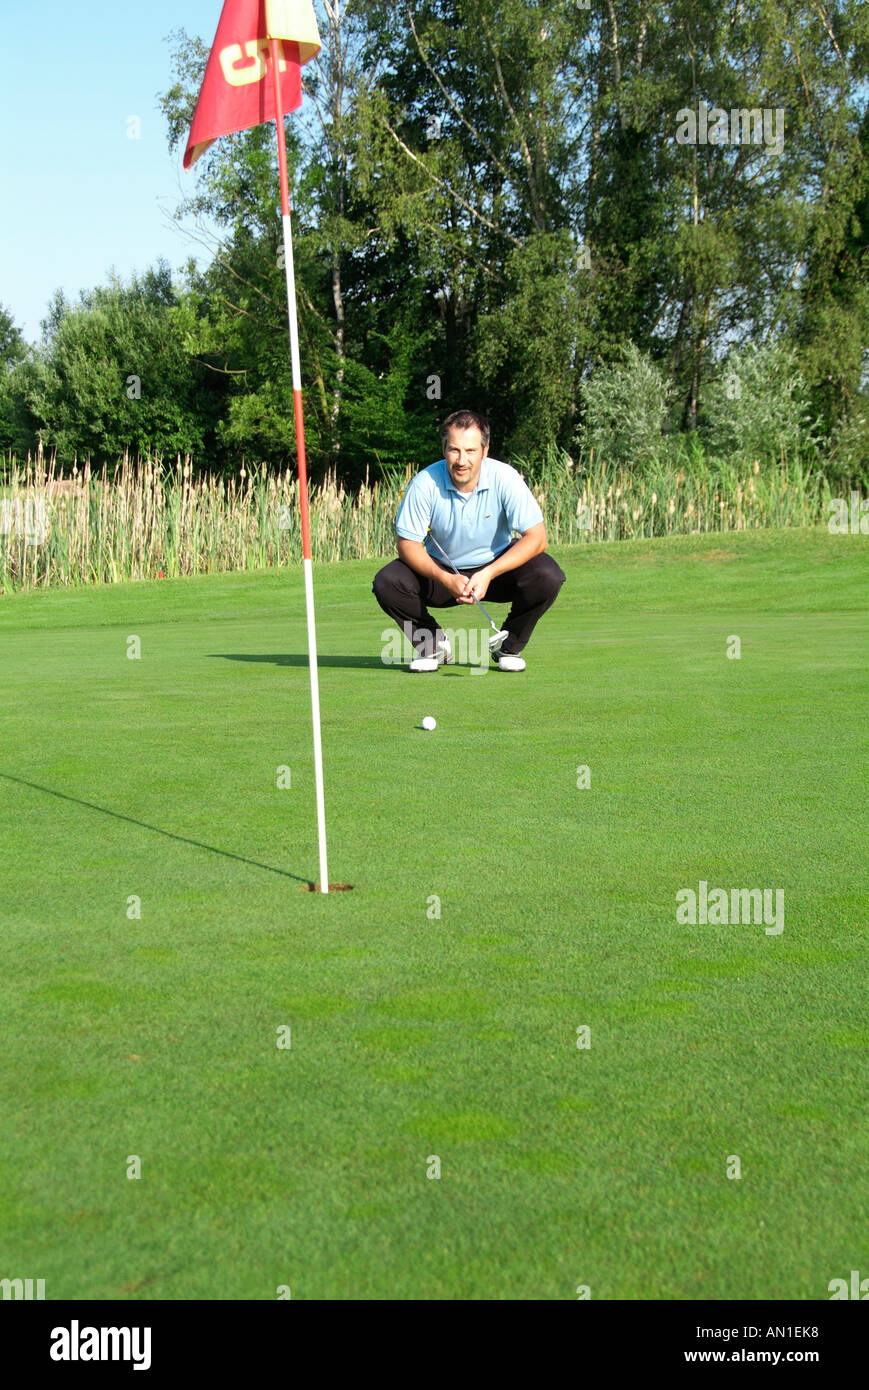 Golf Golfing Golfsport, a golf player concentrating on his hole on greenfee Stock Photo